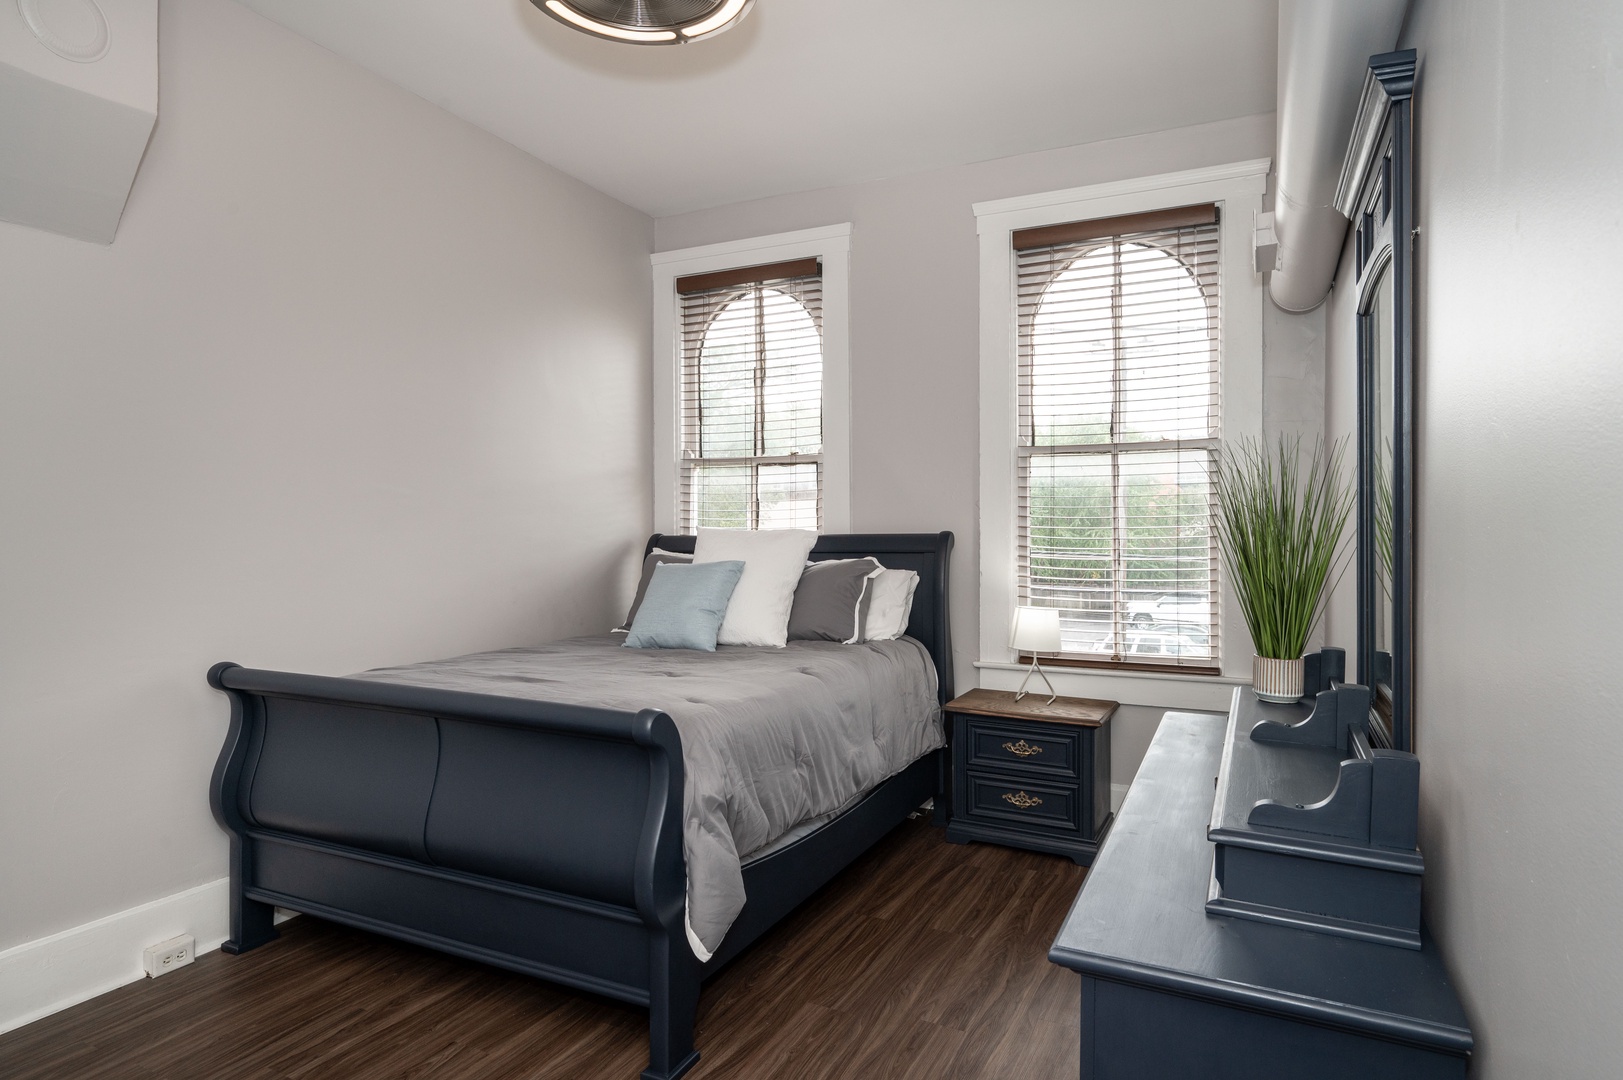 Apt 3 – The 2nd of 2 queen bedrooms, with dresser space & high ceilings